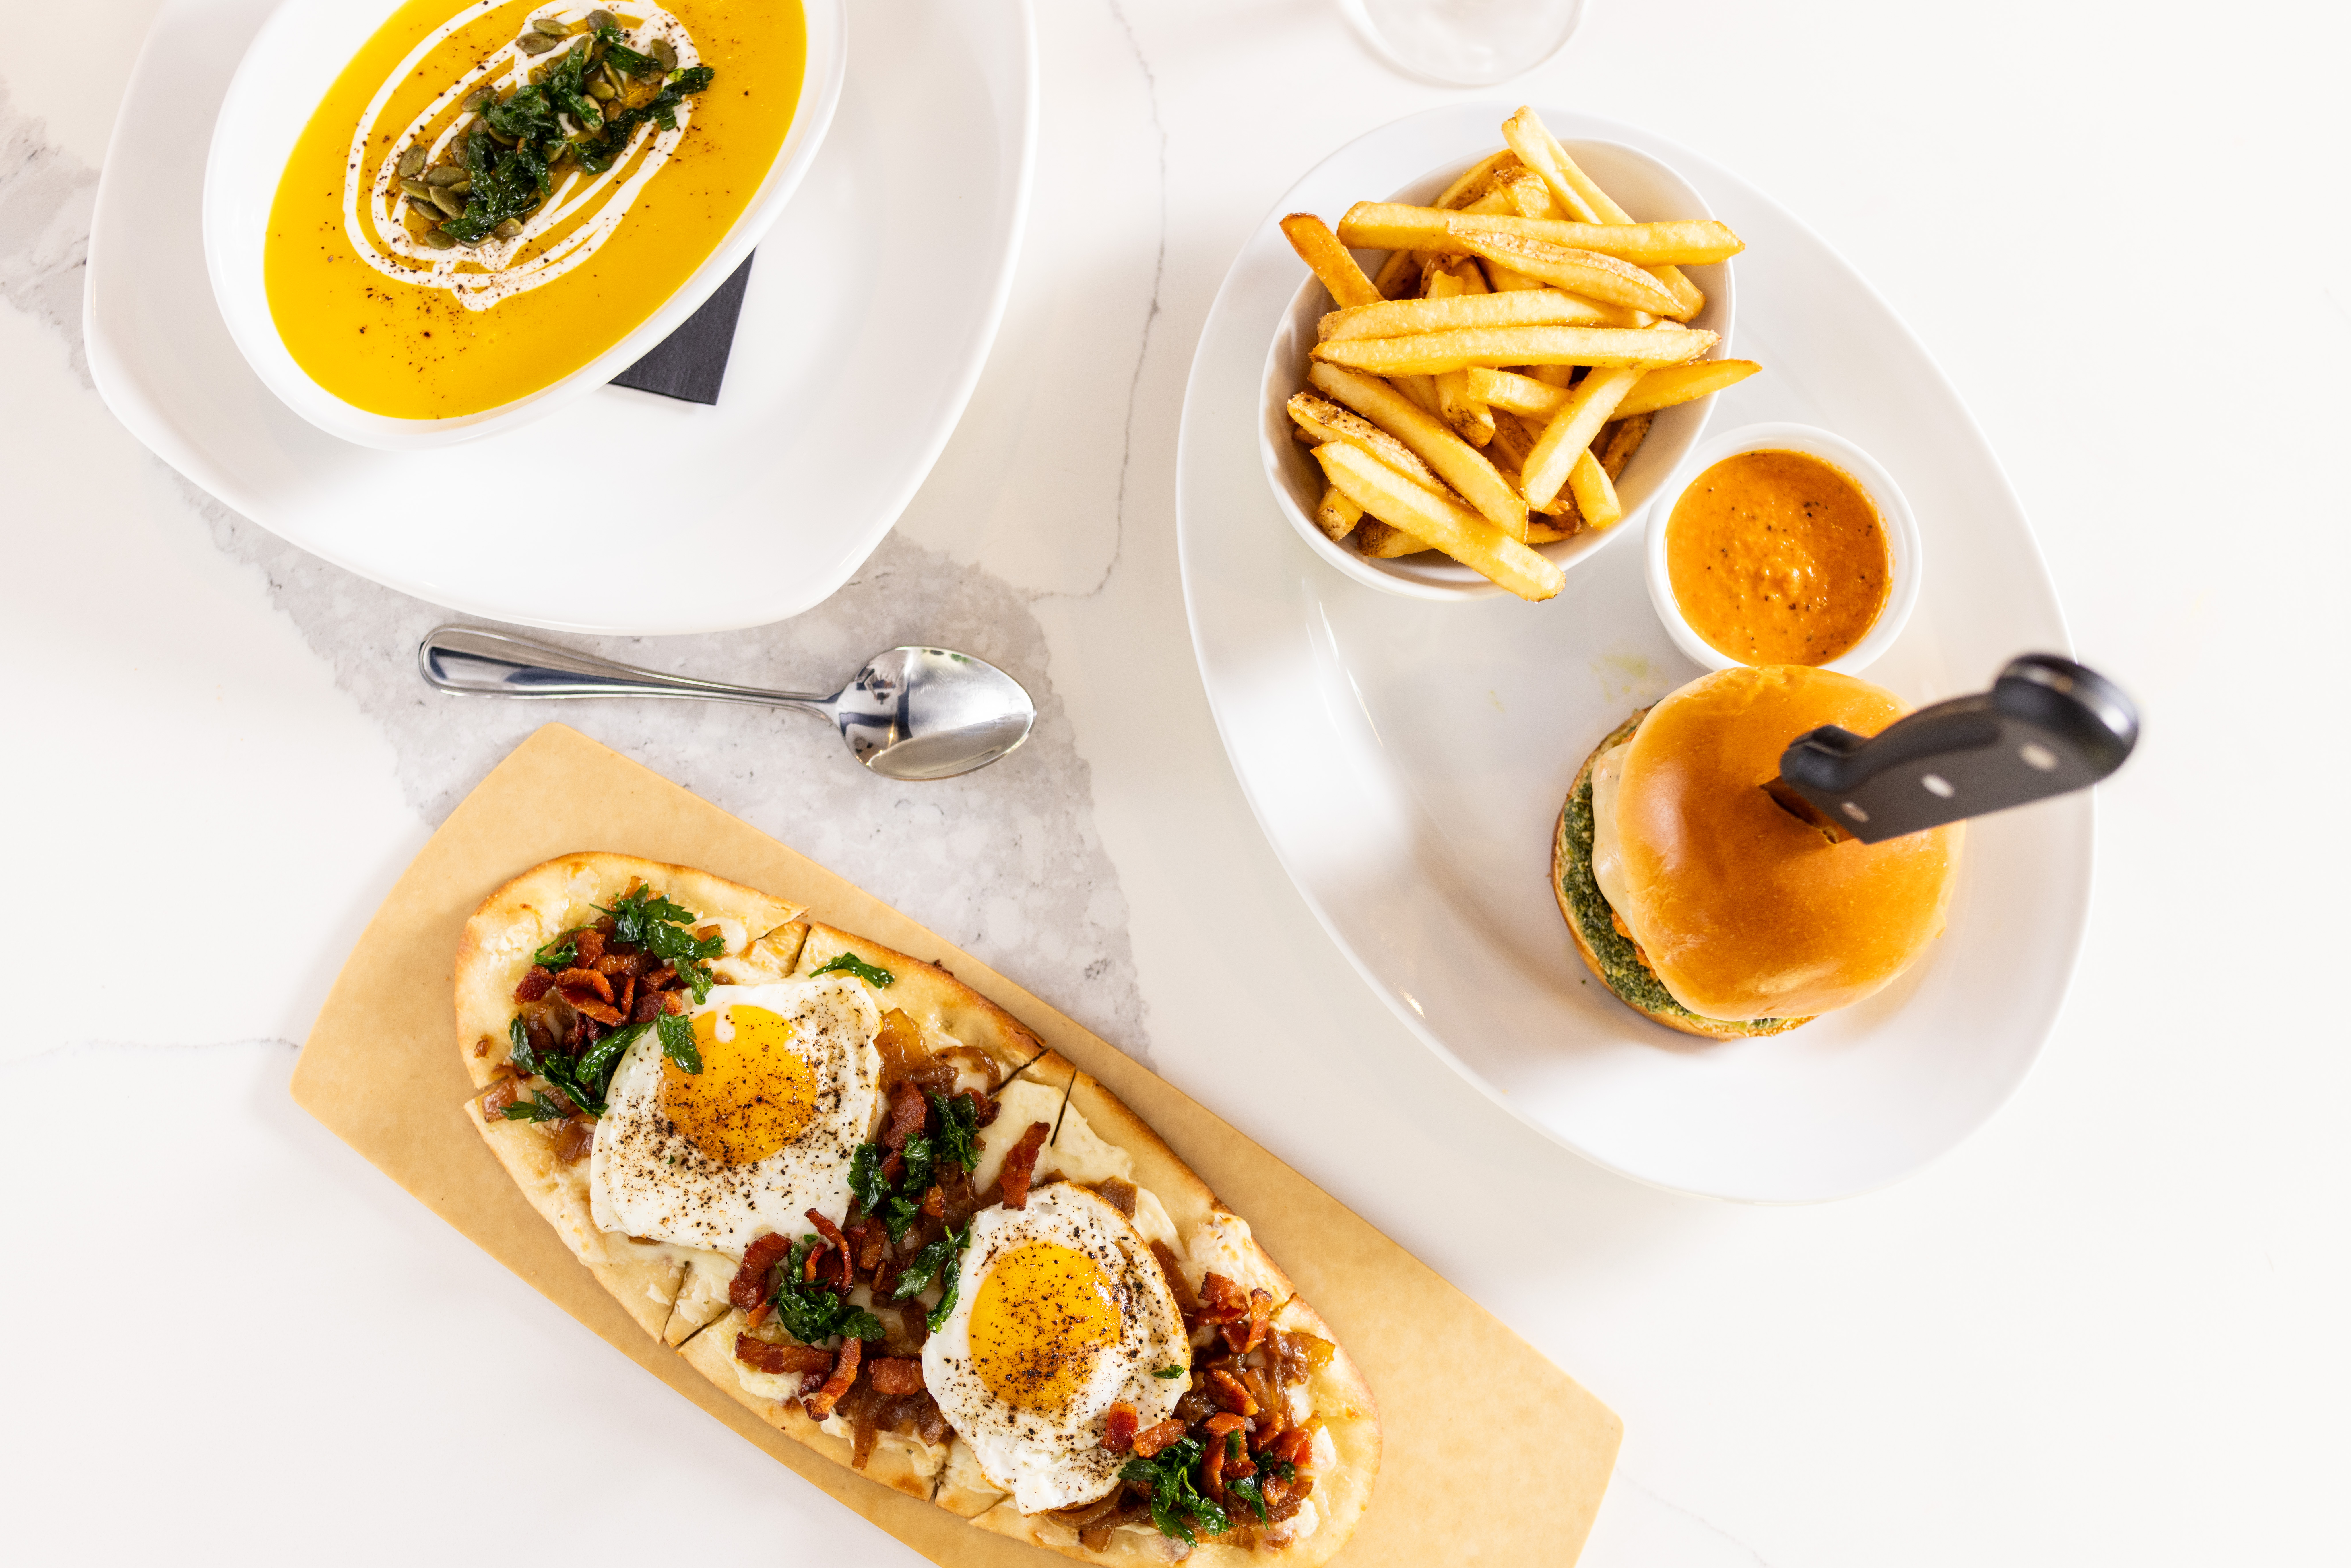 Roasted Butternut Soup, Carbonara Flatbread, Wagyu Meatball Burger, and Fries on White Dishes